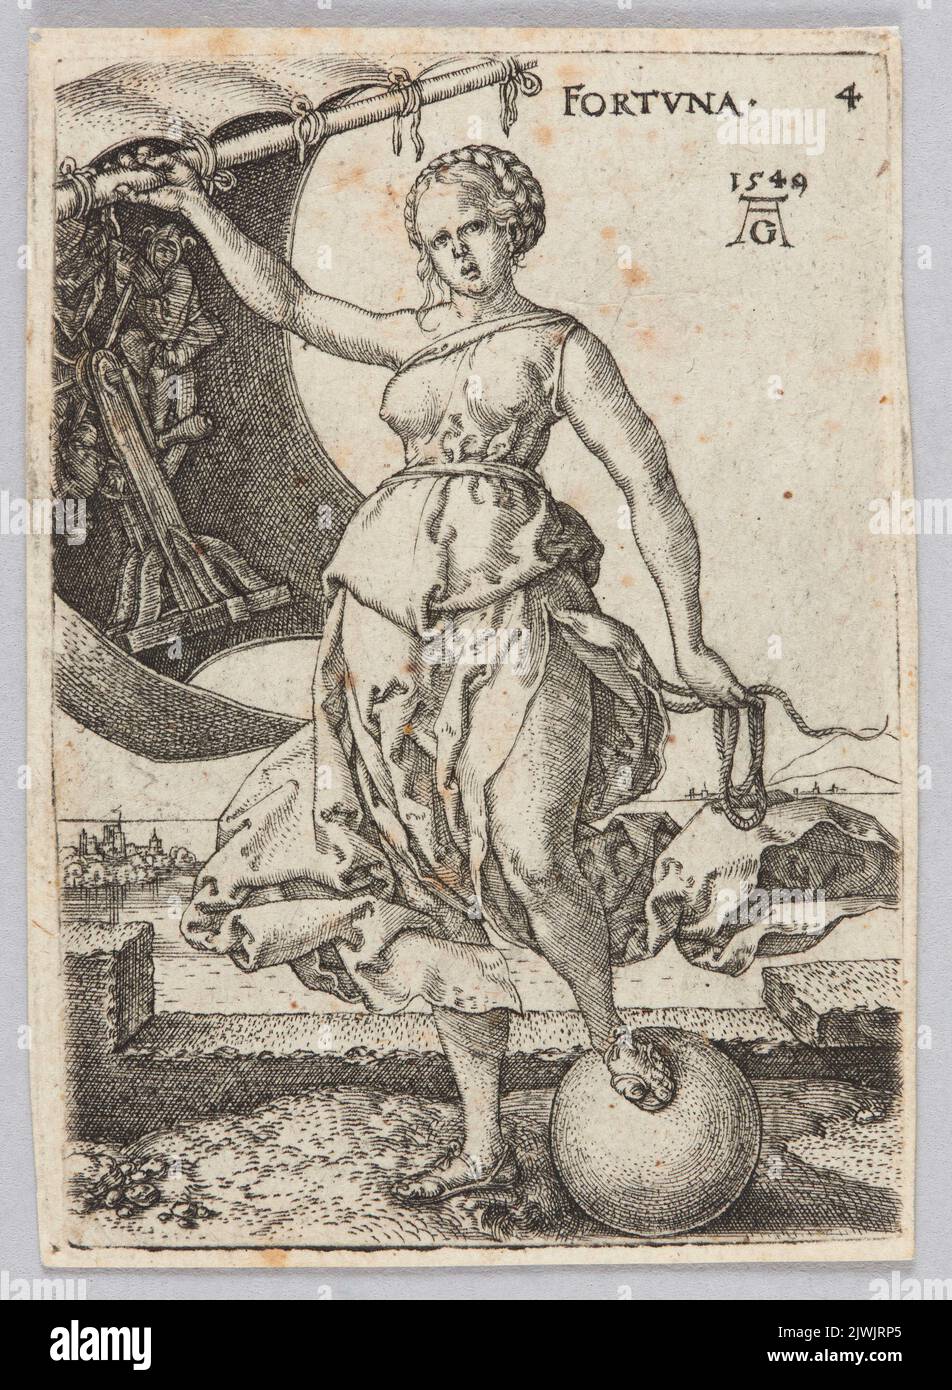 The Fortune, from the cycle: Allegorical figures. Aldegrever, Heinrich (1502-1555/1561), graphic artist Stock Photo